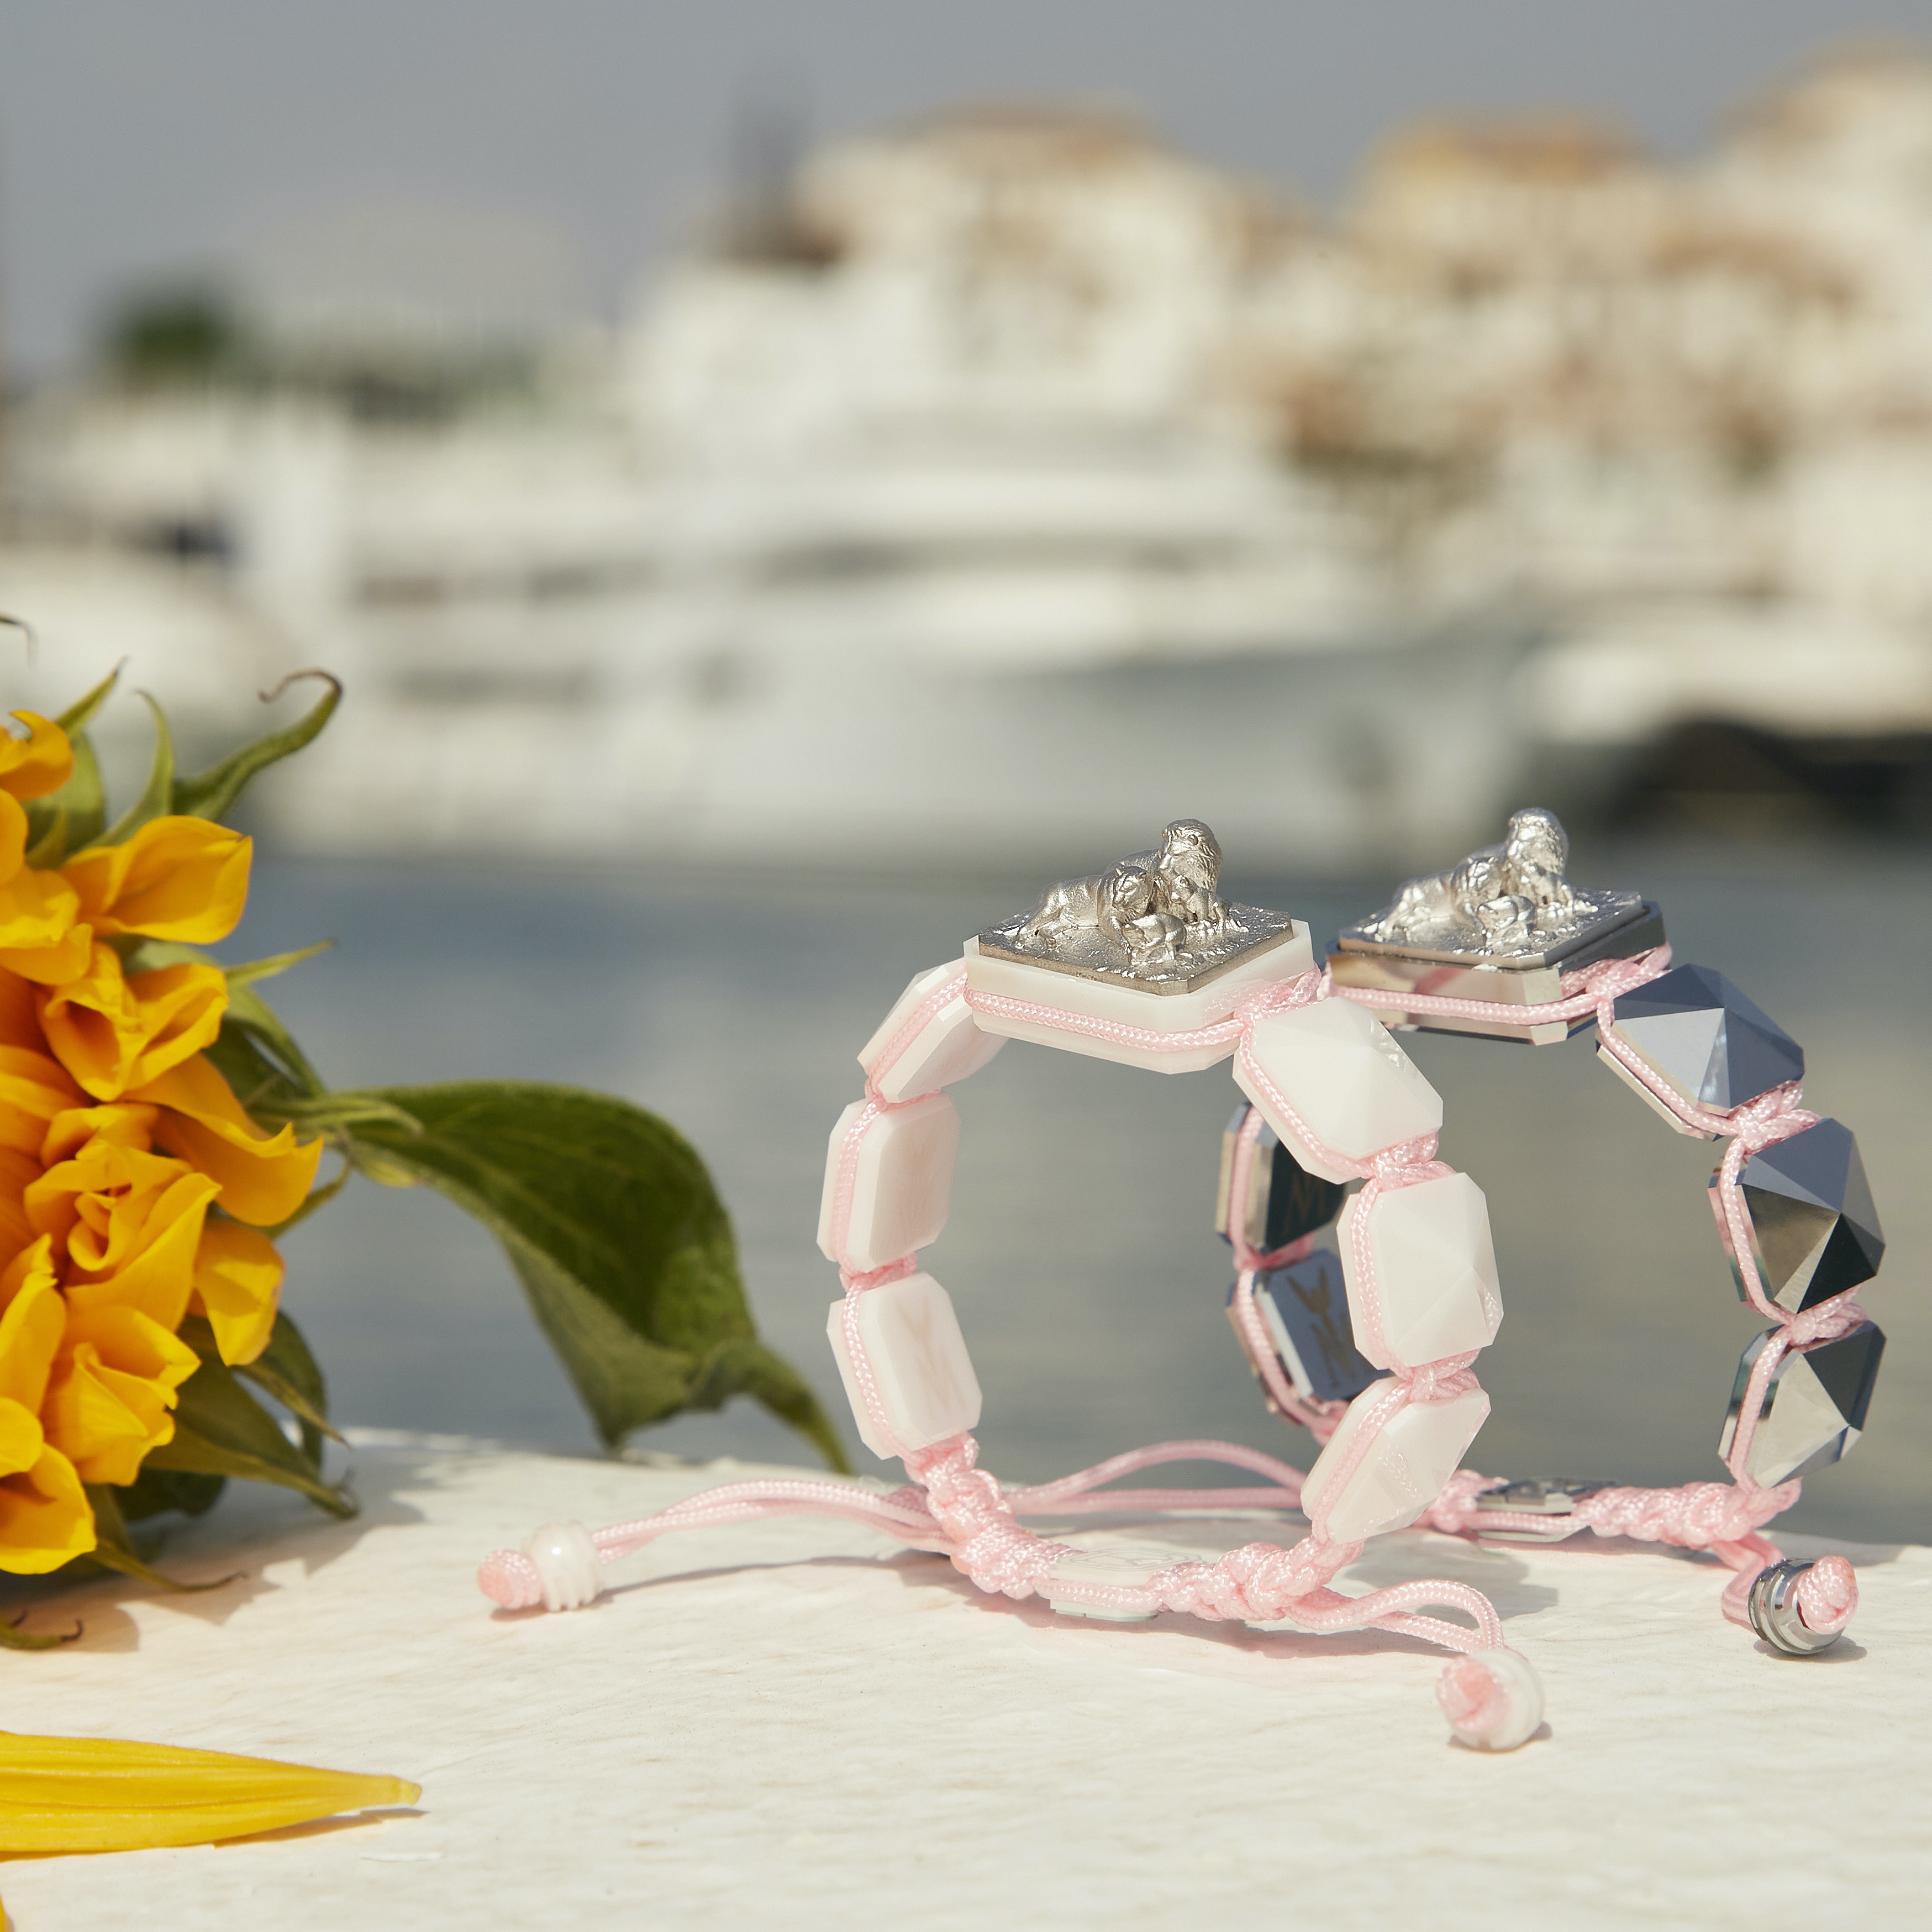 I'm Different bracelet with ceramic and sculpture finished in a Platinum effect complemented with a pink coloured cord.